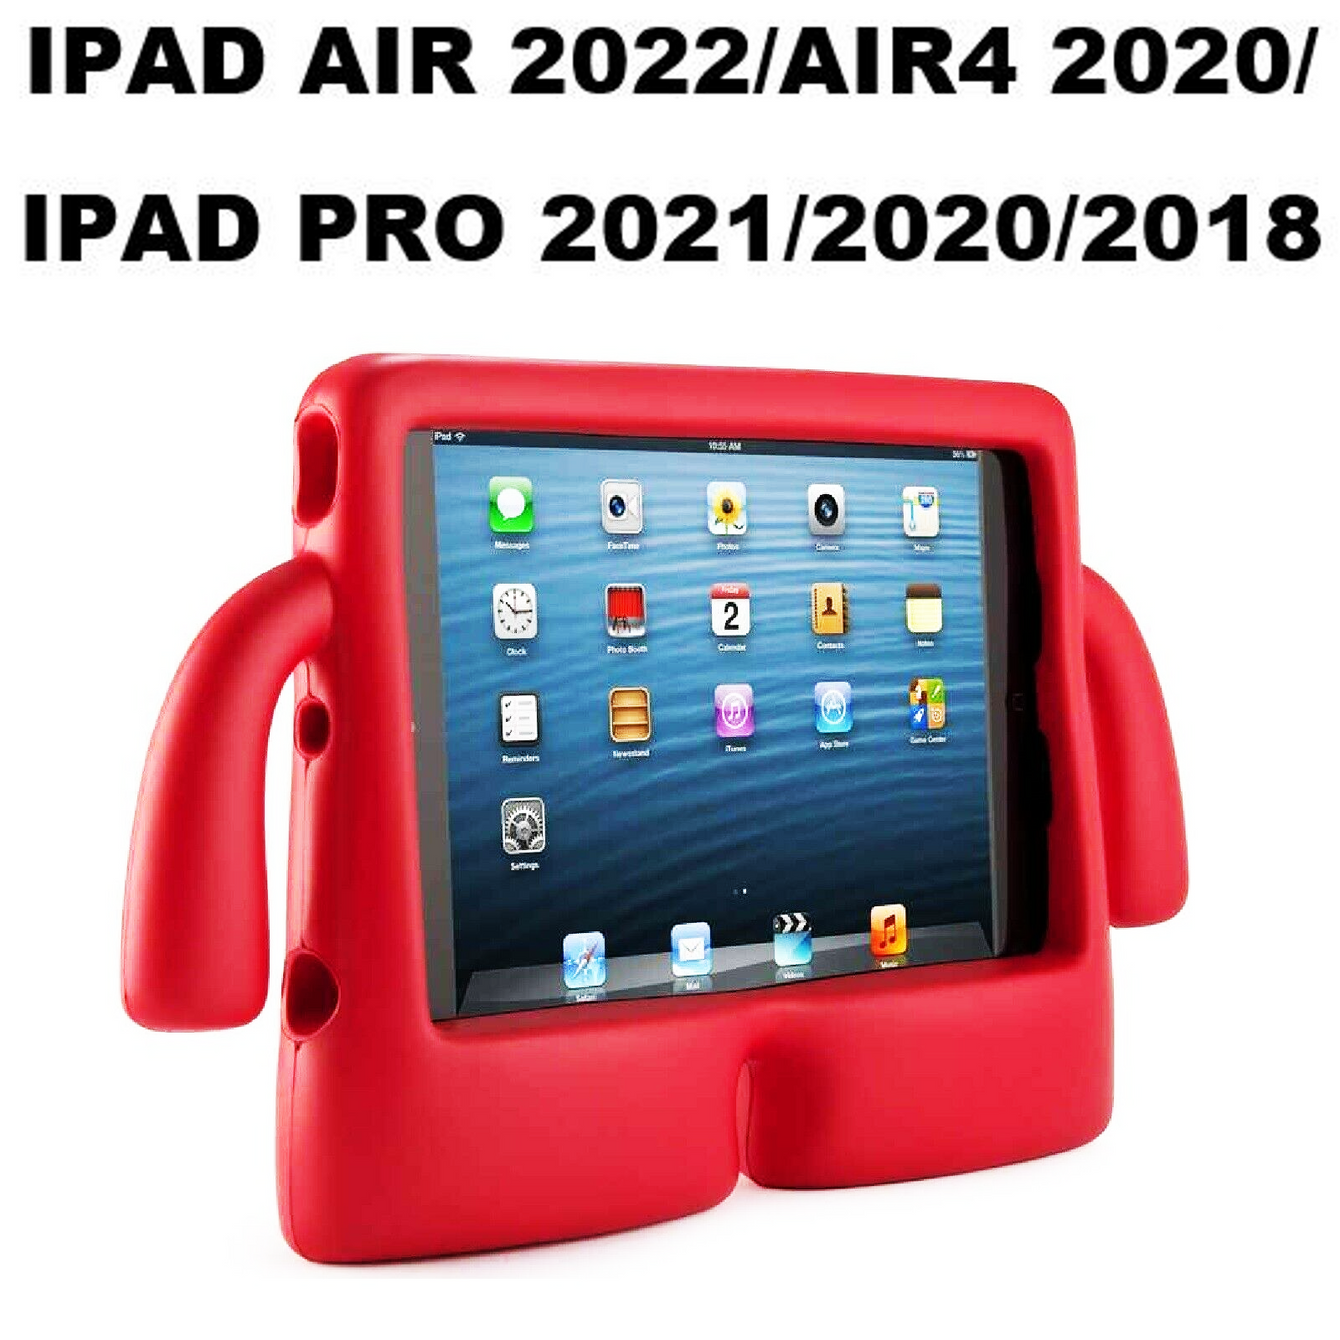 RED 3D SILICON KID'S CASE IPAD AIR 2022